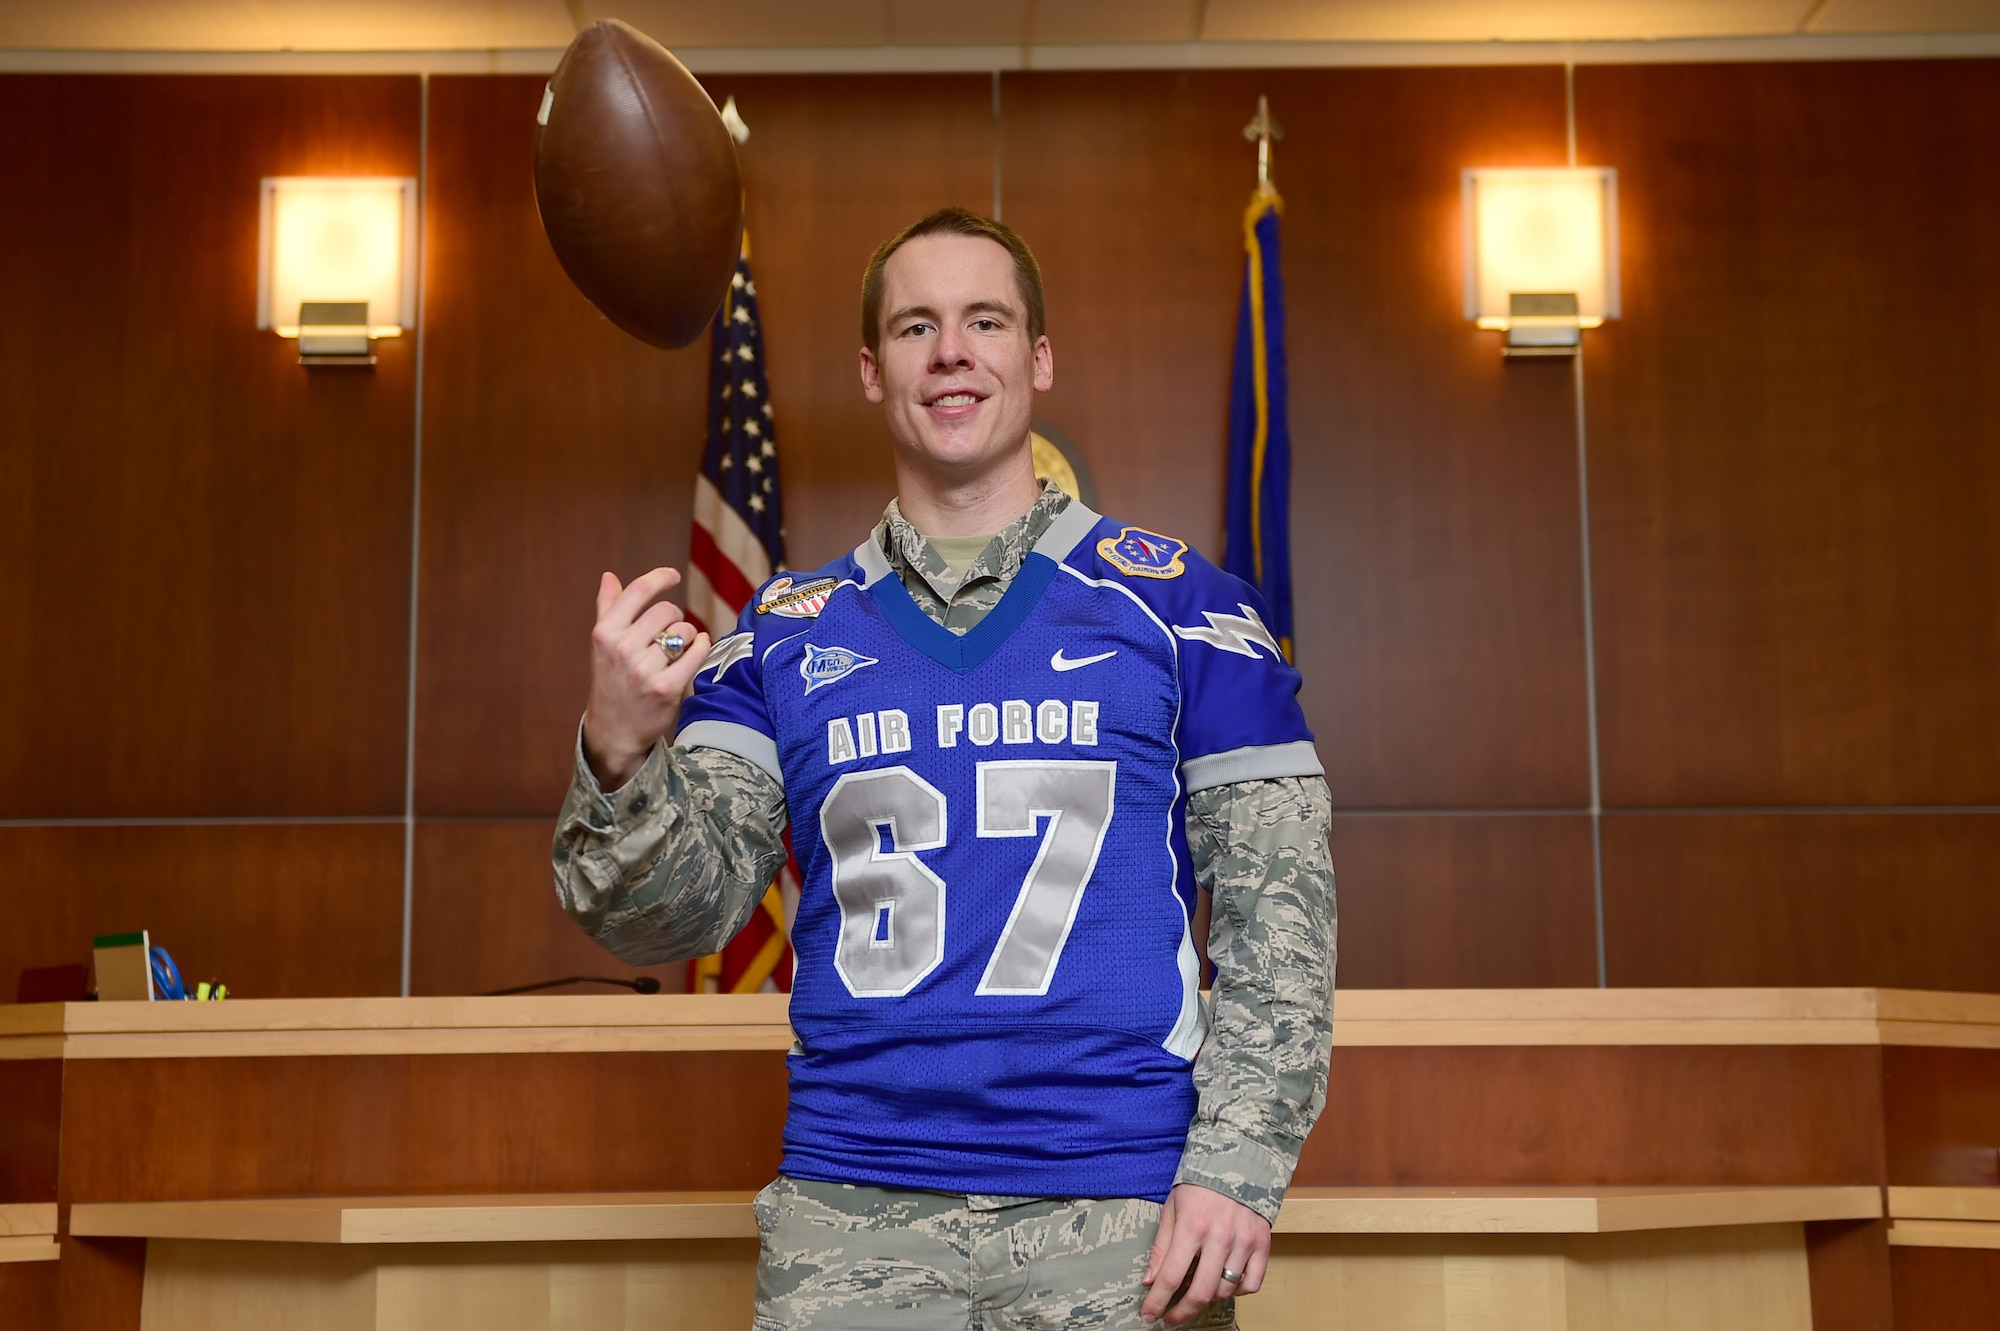 Capt. Tyler Weeks, a 460th Space Wing Staff Judge Advocate intern, wears his U.S. Air Force Academy Falcons jersey Aug. 12, 2015, on Buckley Air Force Base, Colo. Weeks played offensive line for the Falcons during his four years at the Academy. He is pursuing a law degree from the University of Colorado Law School and interned at the legal office during the summer. (U.S. Air Force photo/Airman 1st Class Luke W. Nowakowski)